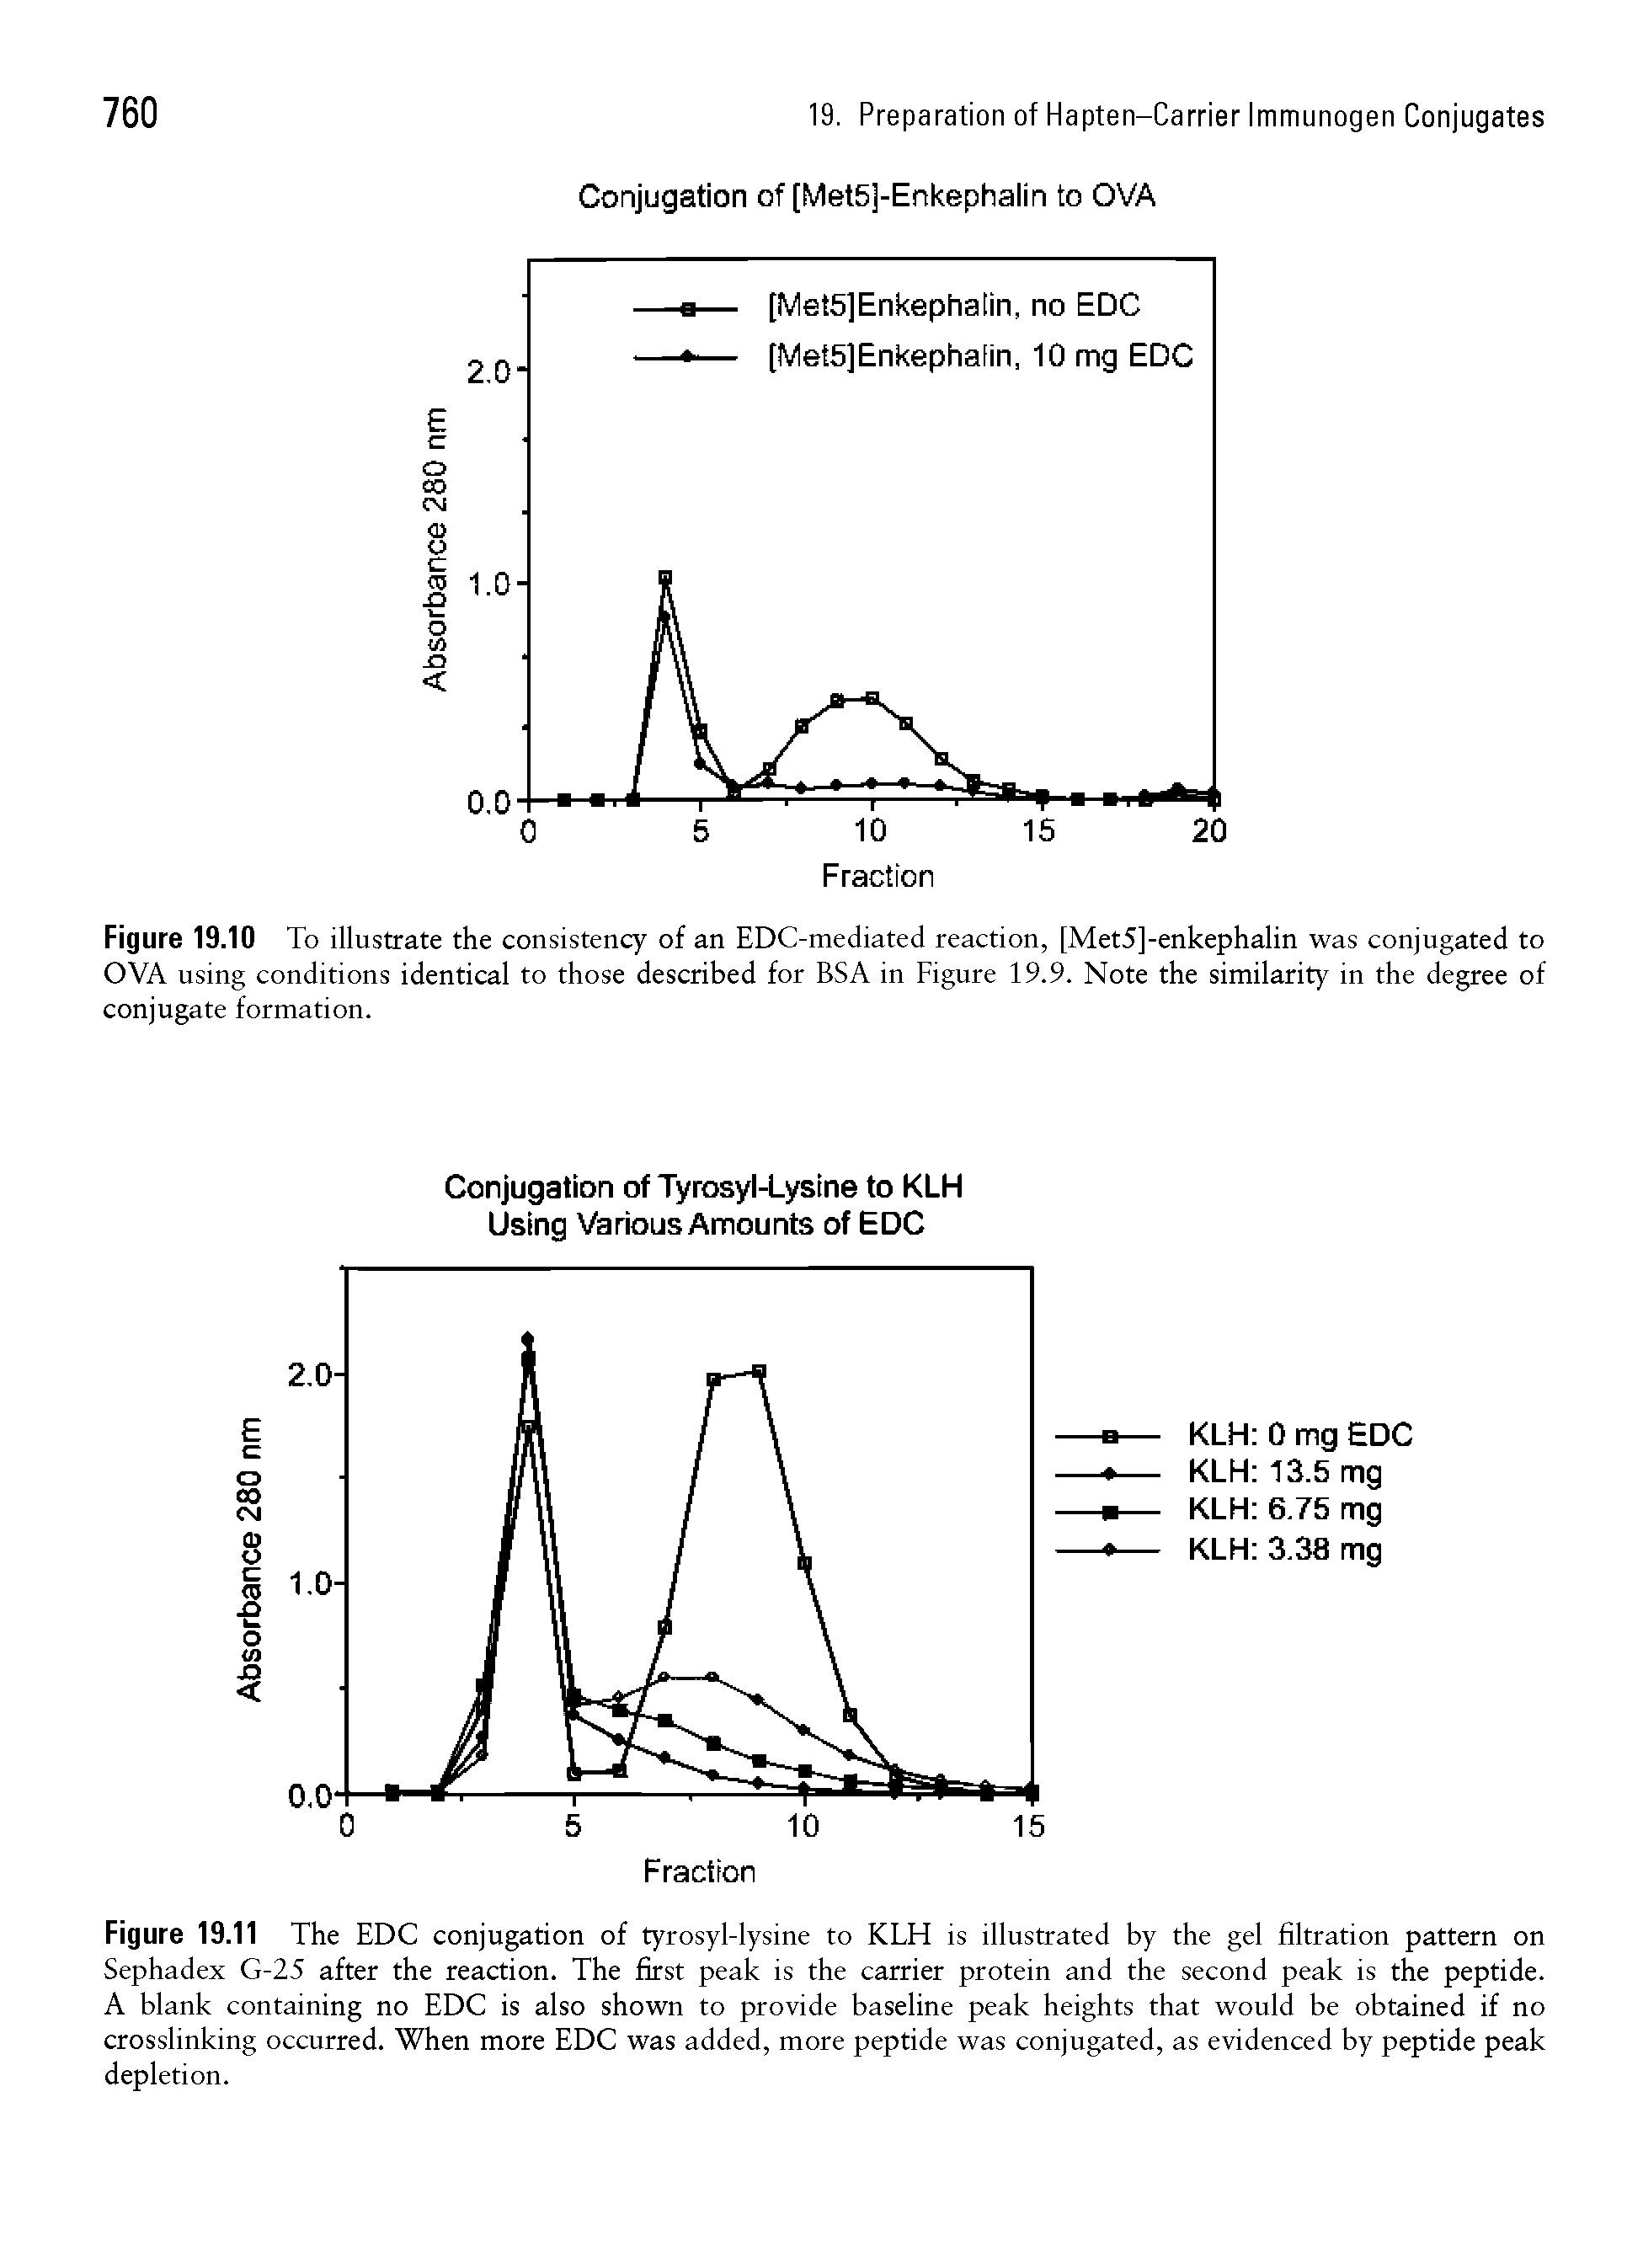 Figure 19.11 The EDC conjugation of tyrosyl-lysine to KLH is illustrated by the gel filtration pattern on Sephadex G-25 after the reaction. The first peak is the carrier protein and the second peak is the peptide. A blank containing no EDC is also shown to provide baseline peak heights that would be obtained if no crosslinking occurred. When more EDC was added, more peptide was conjugated, as evidenced by peptide peak depletion.